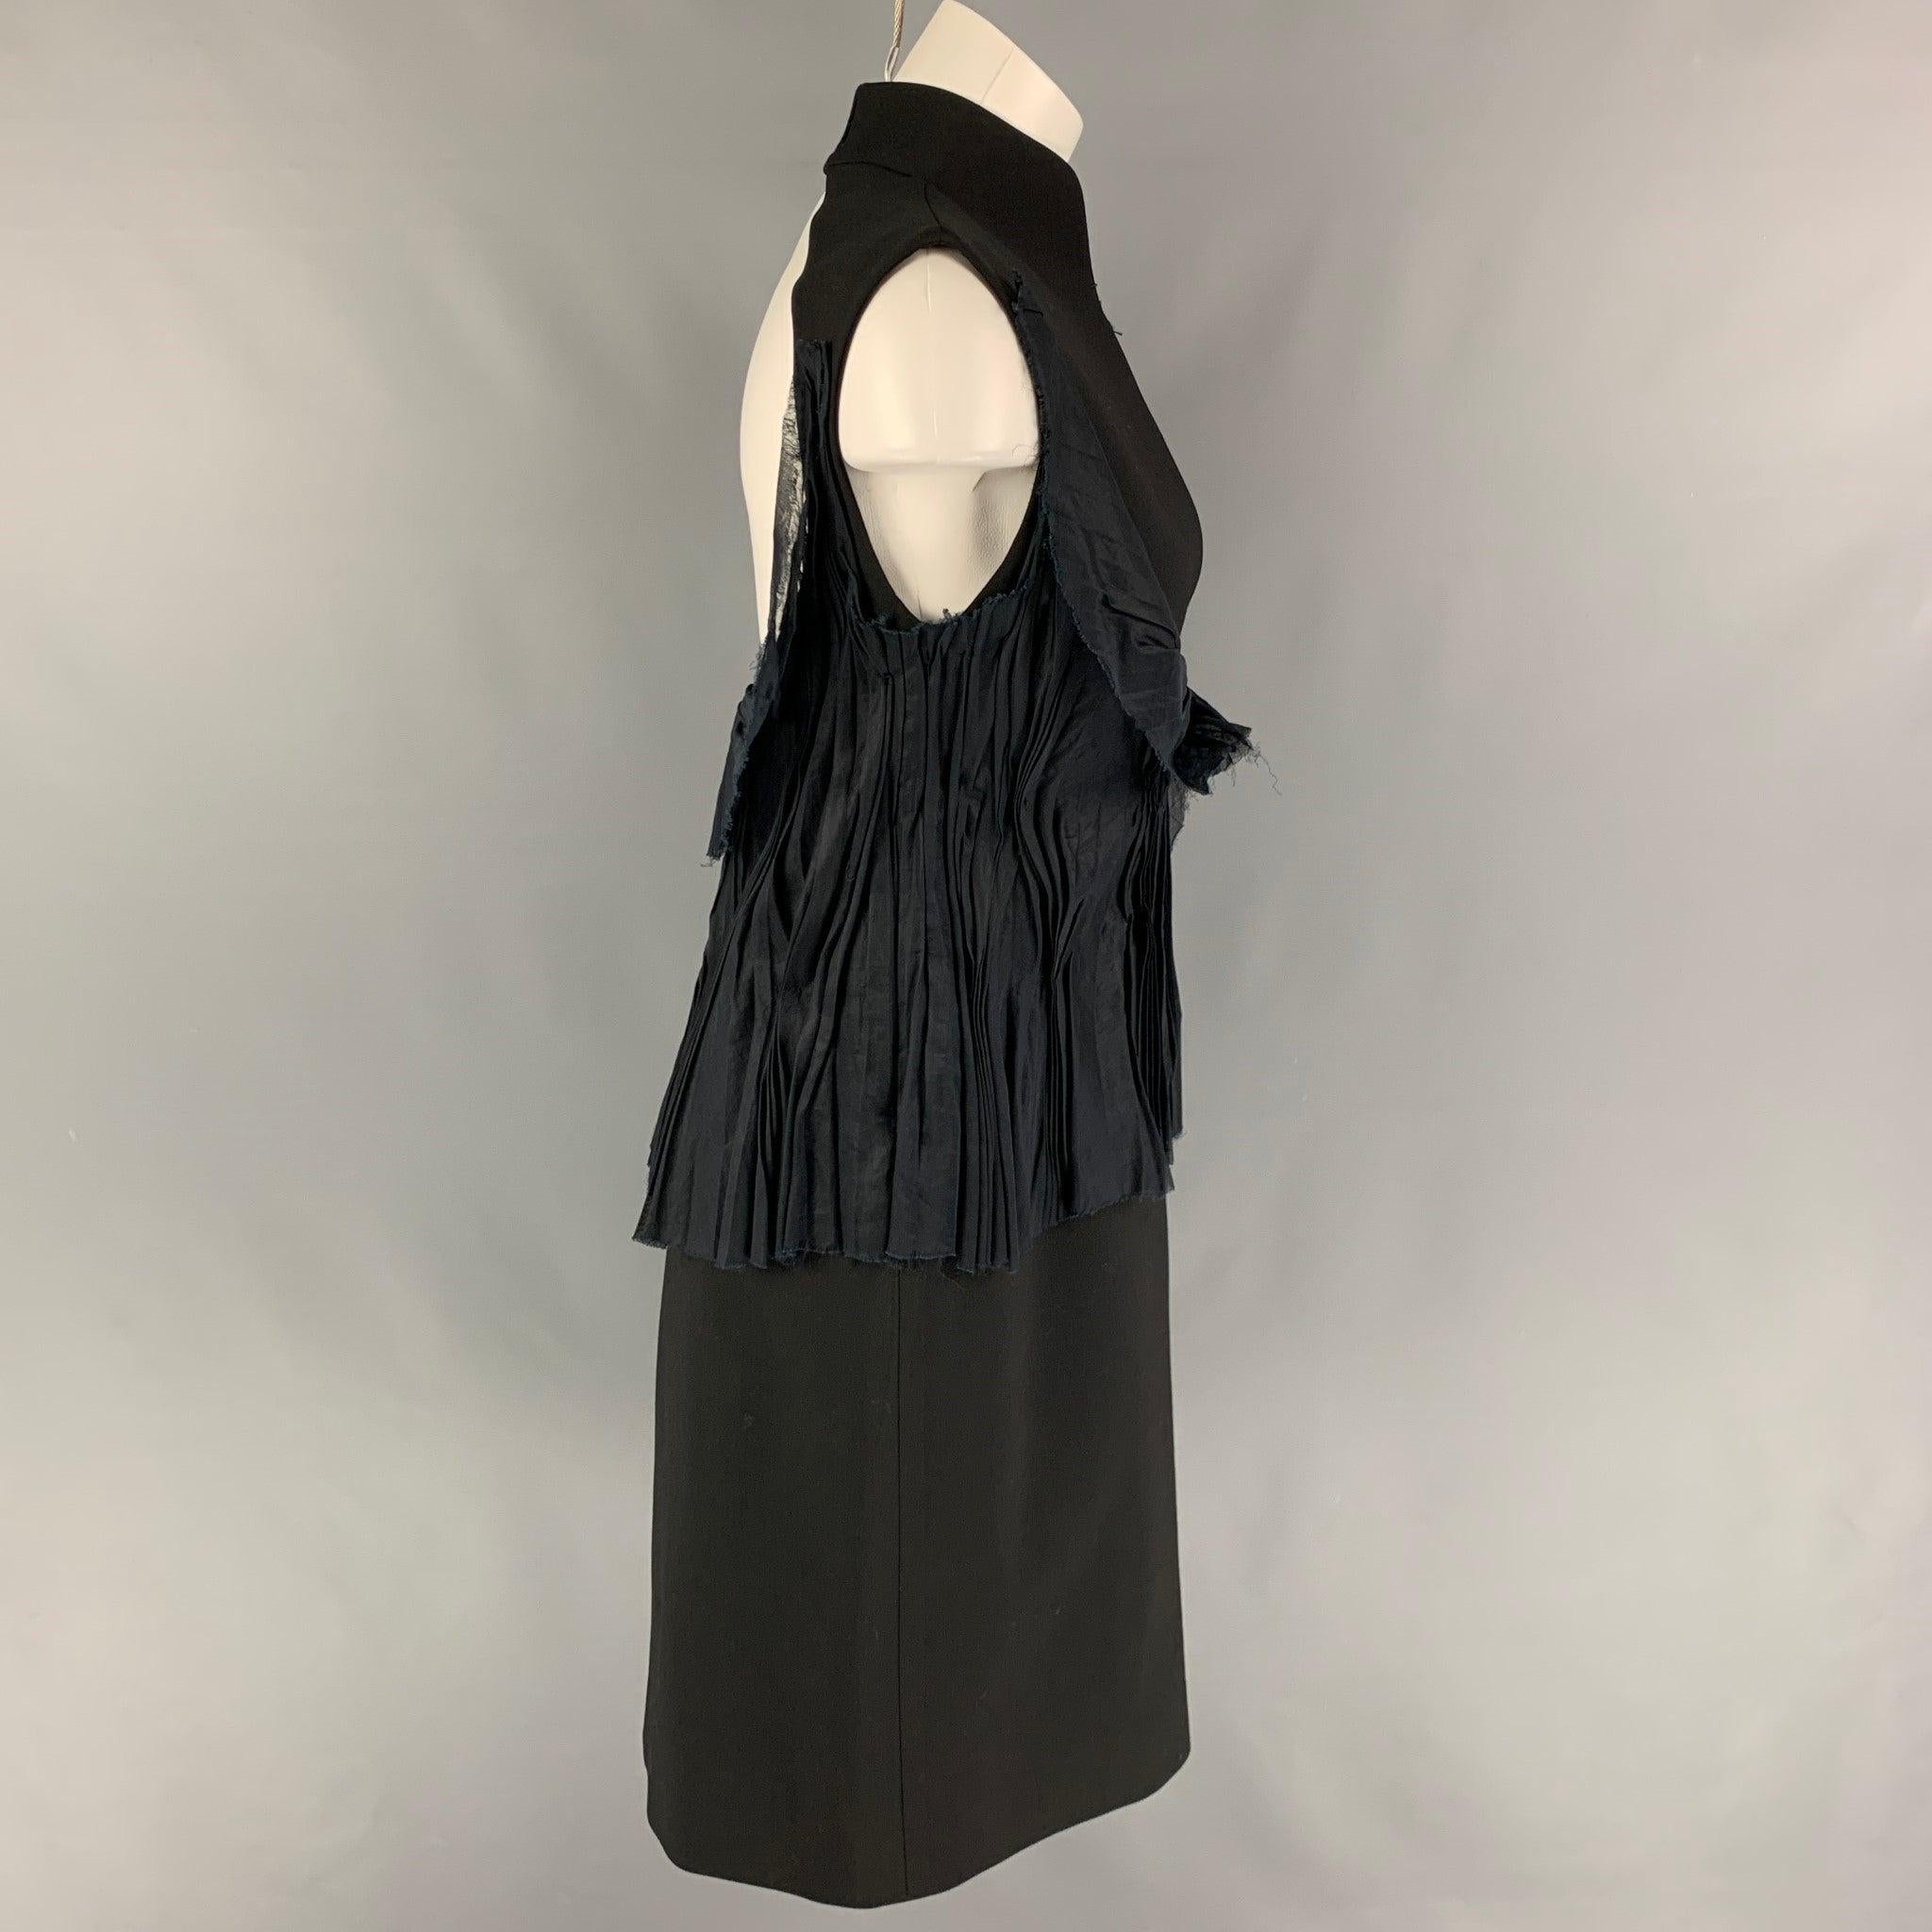 BRIONI dress comes in a black mercerized cotton featuring a high collar, ruffled panel design, sleeveless, open back, side zipper, and a hook & loop closure.Very Good
Pre-Owned Condition. Fabric tag removed. 

Marked:  Size tag removed.